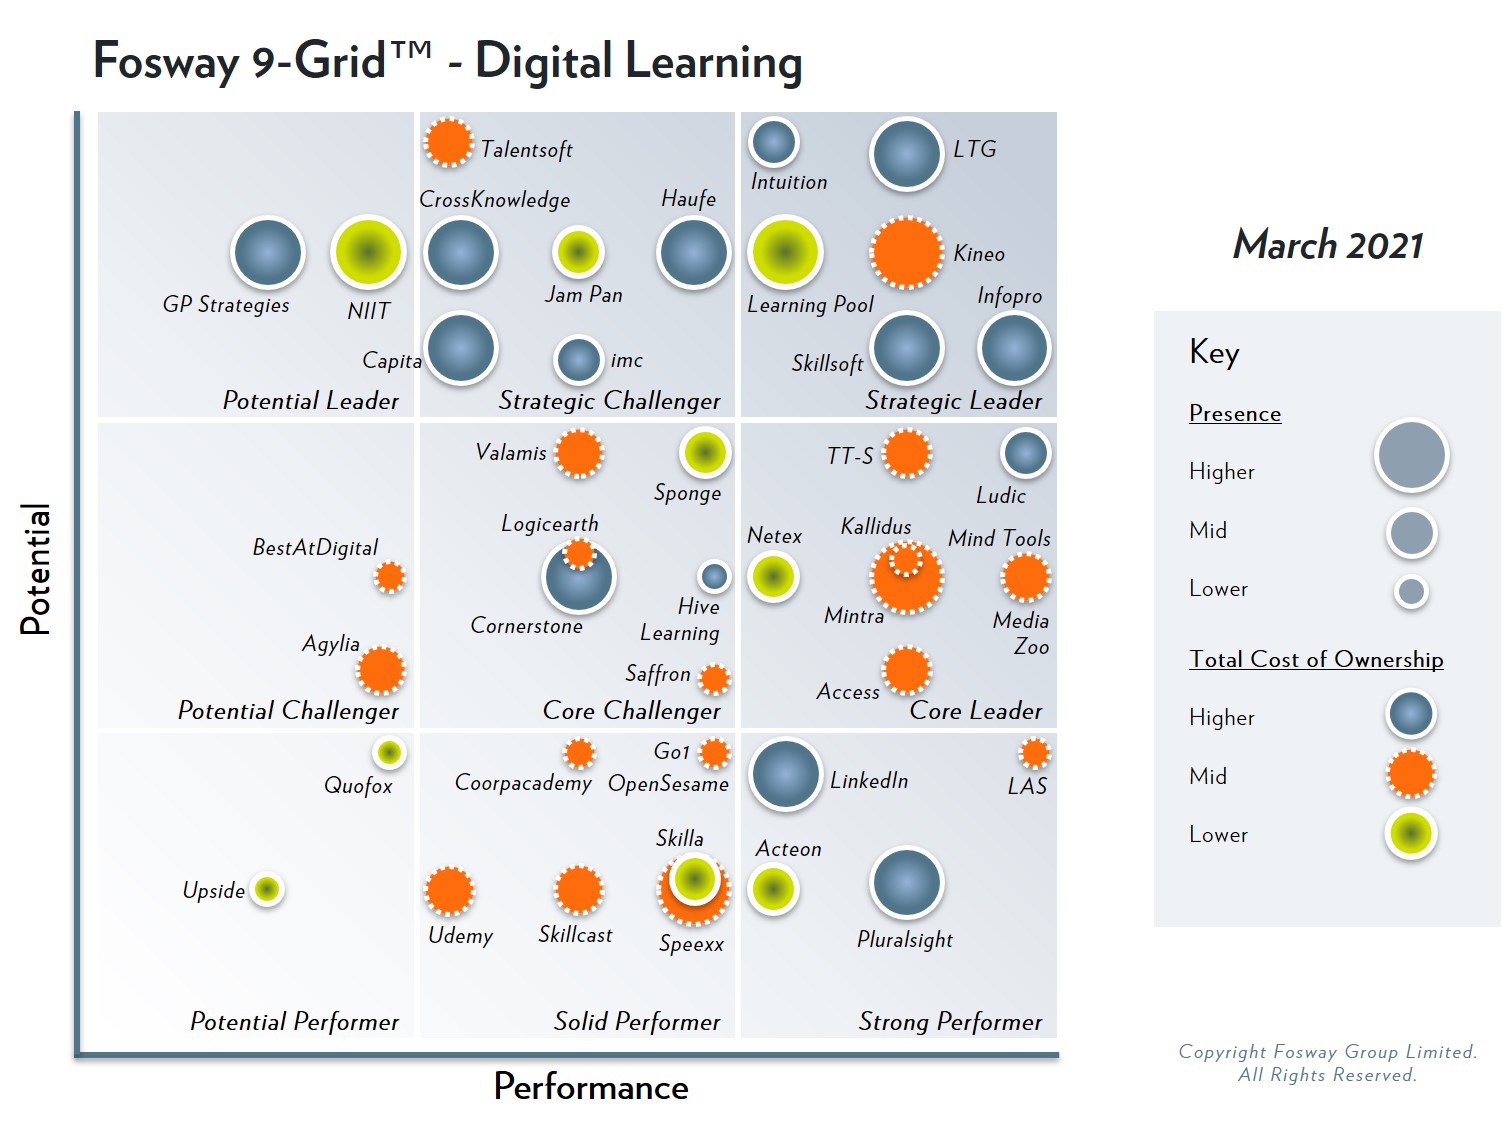 Learning Technologies Group (LTG) has been identified as a Strategic Leader in the 2021 Fosway 9-Grid™ for Digital Learning for the fifth year running.